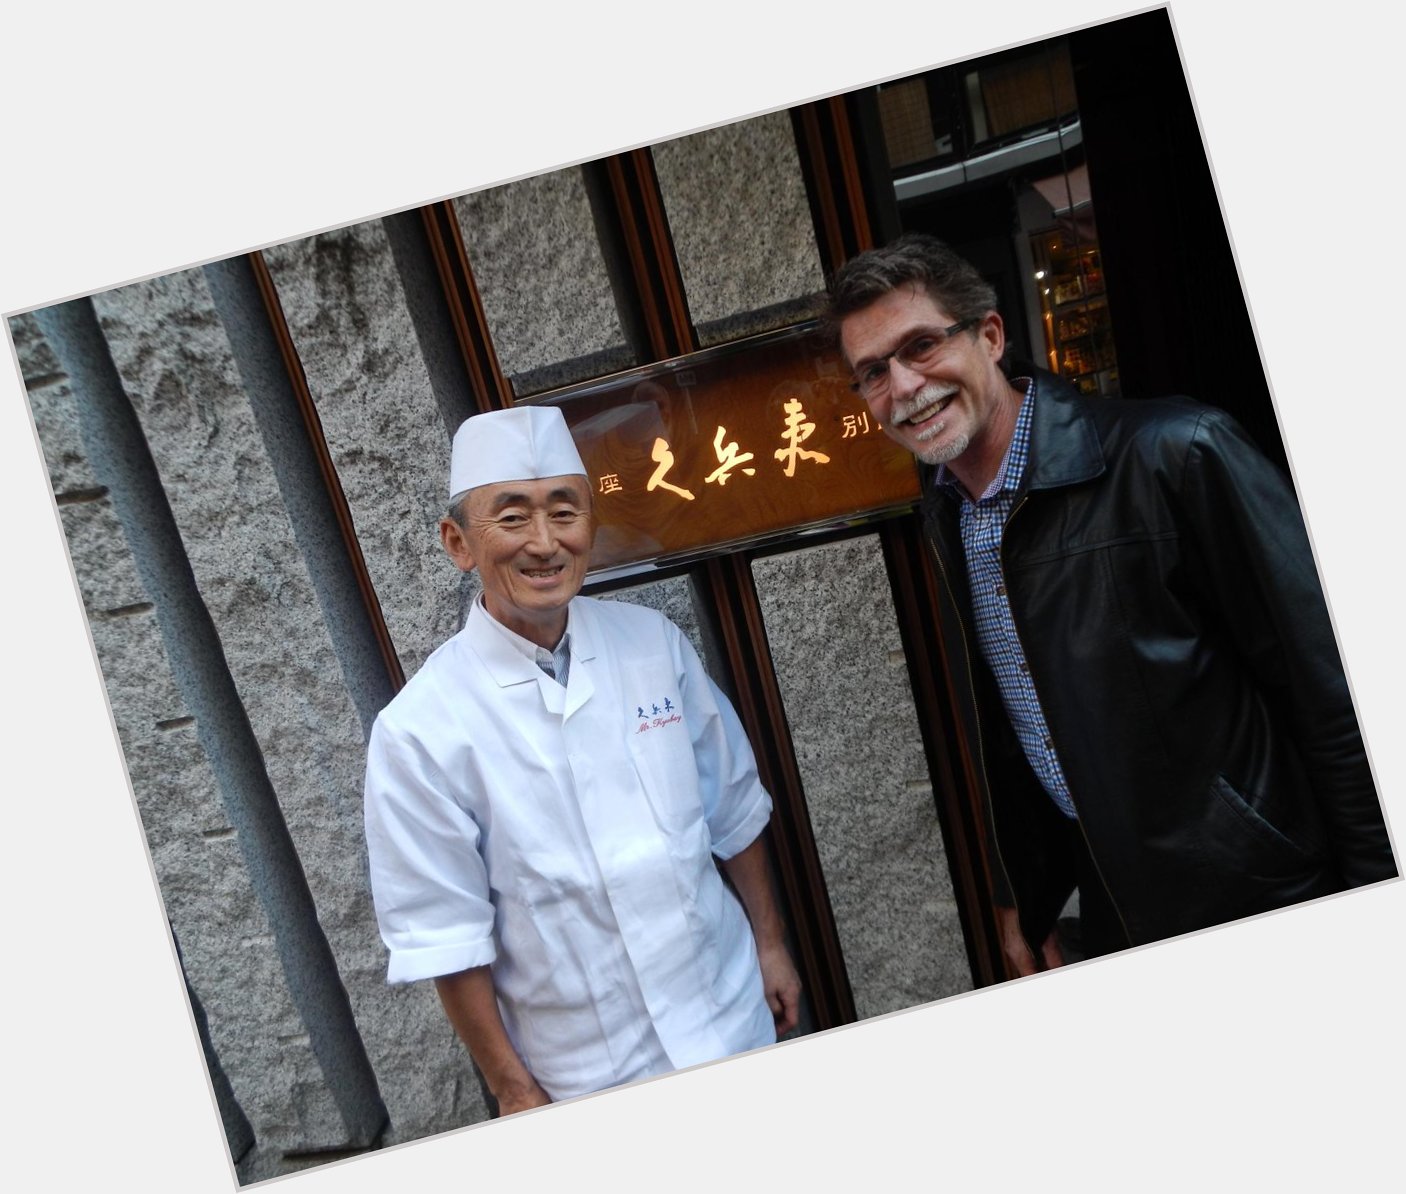 Happy Birthday Feliz Compleanos. 

Last years b-day at Ginza Kyubey with chef Imada. 
come back soon! 